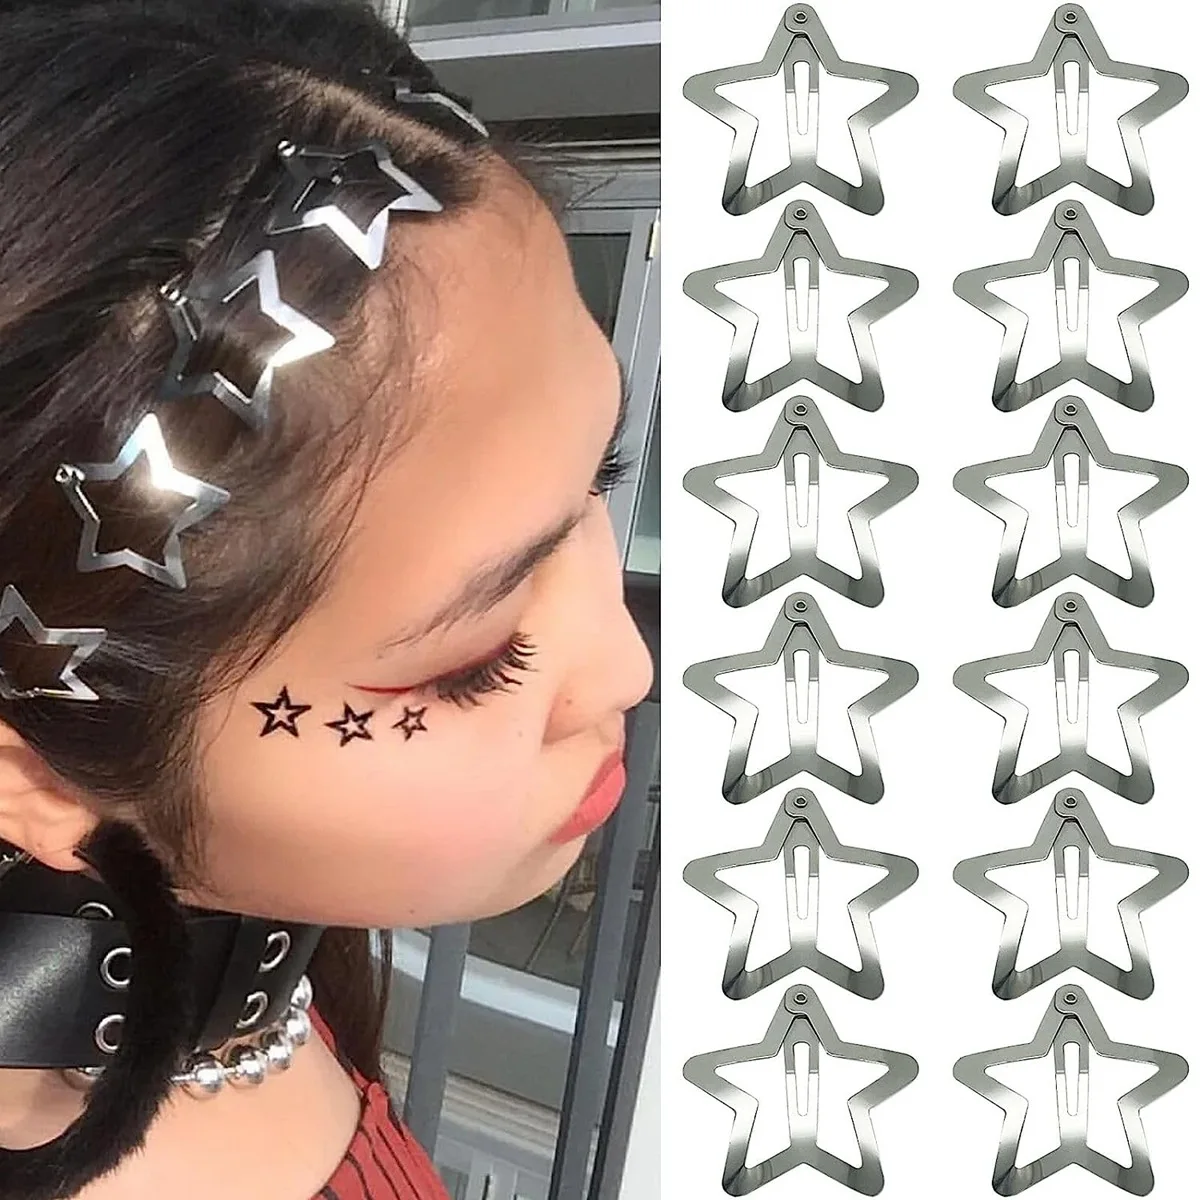 

Wholesale 12pcs/bag 1.22 inches metal star hairpin cute silver color hair bobby clips pins